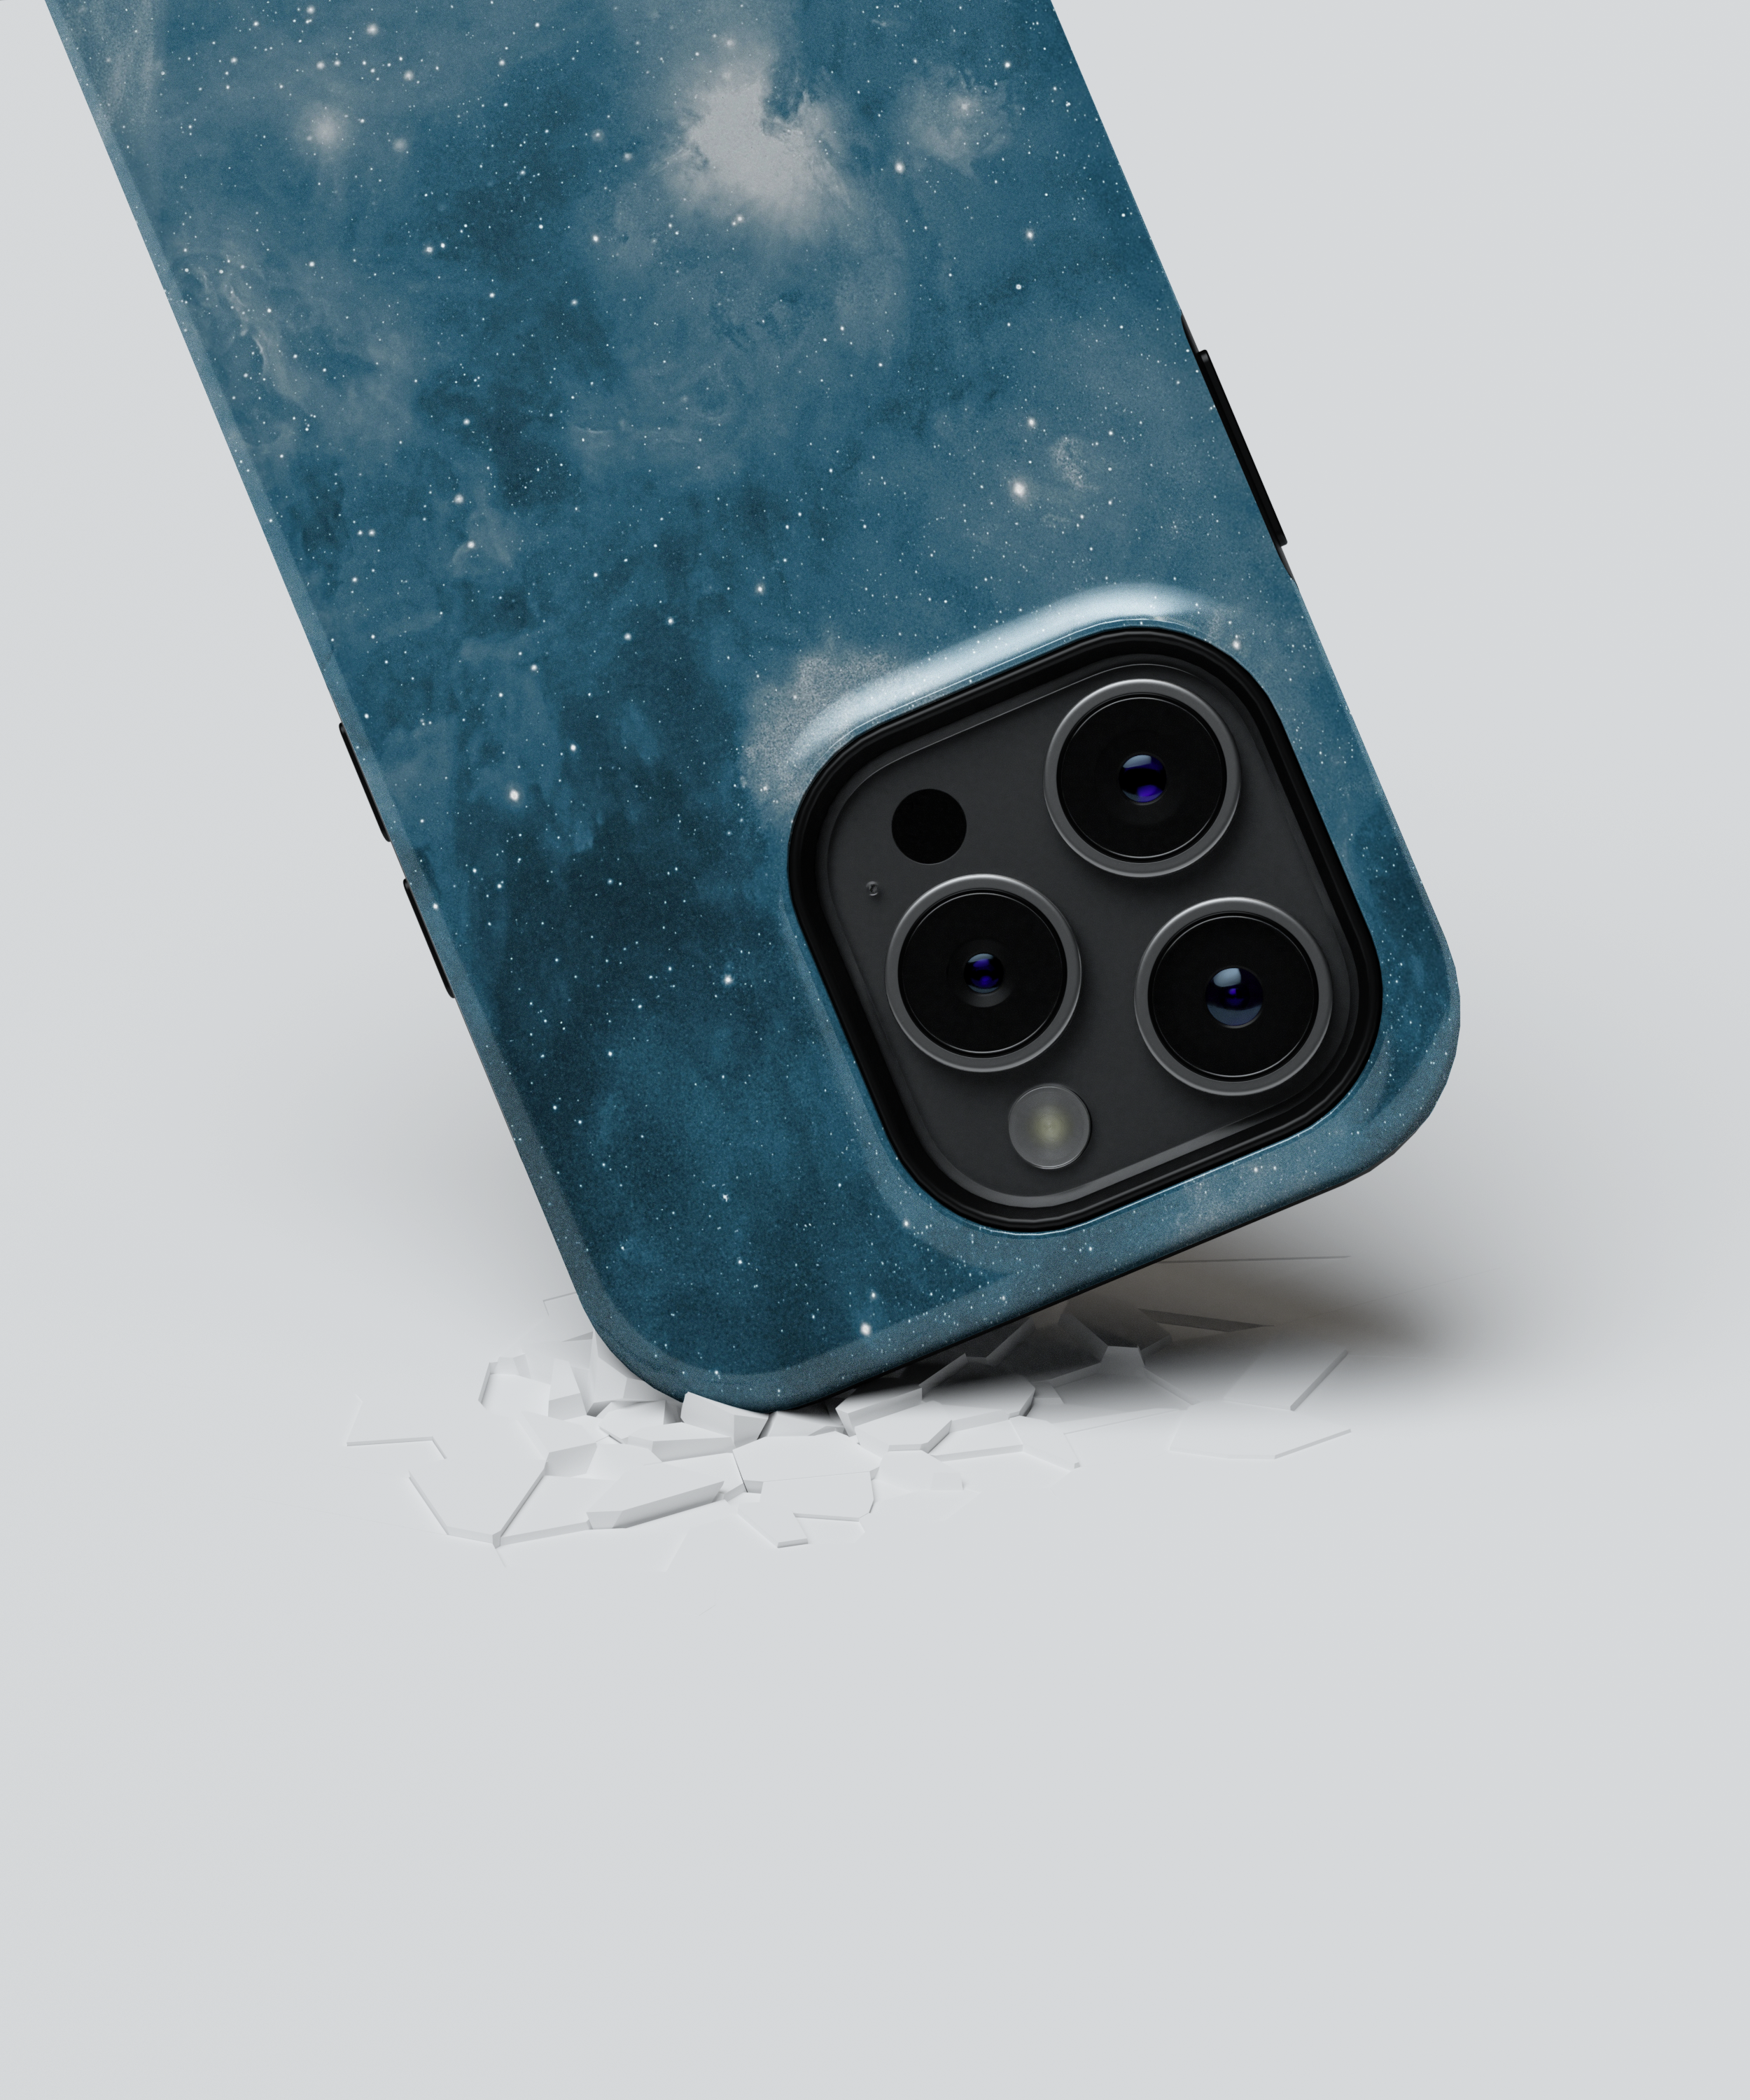 iPhone Tough Case with MagSafe- Celestial Frost - CASETEROID